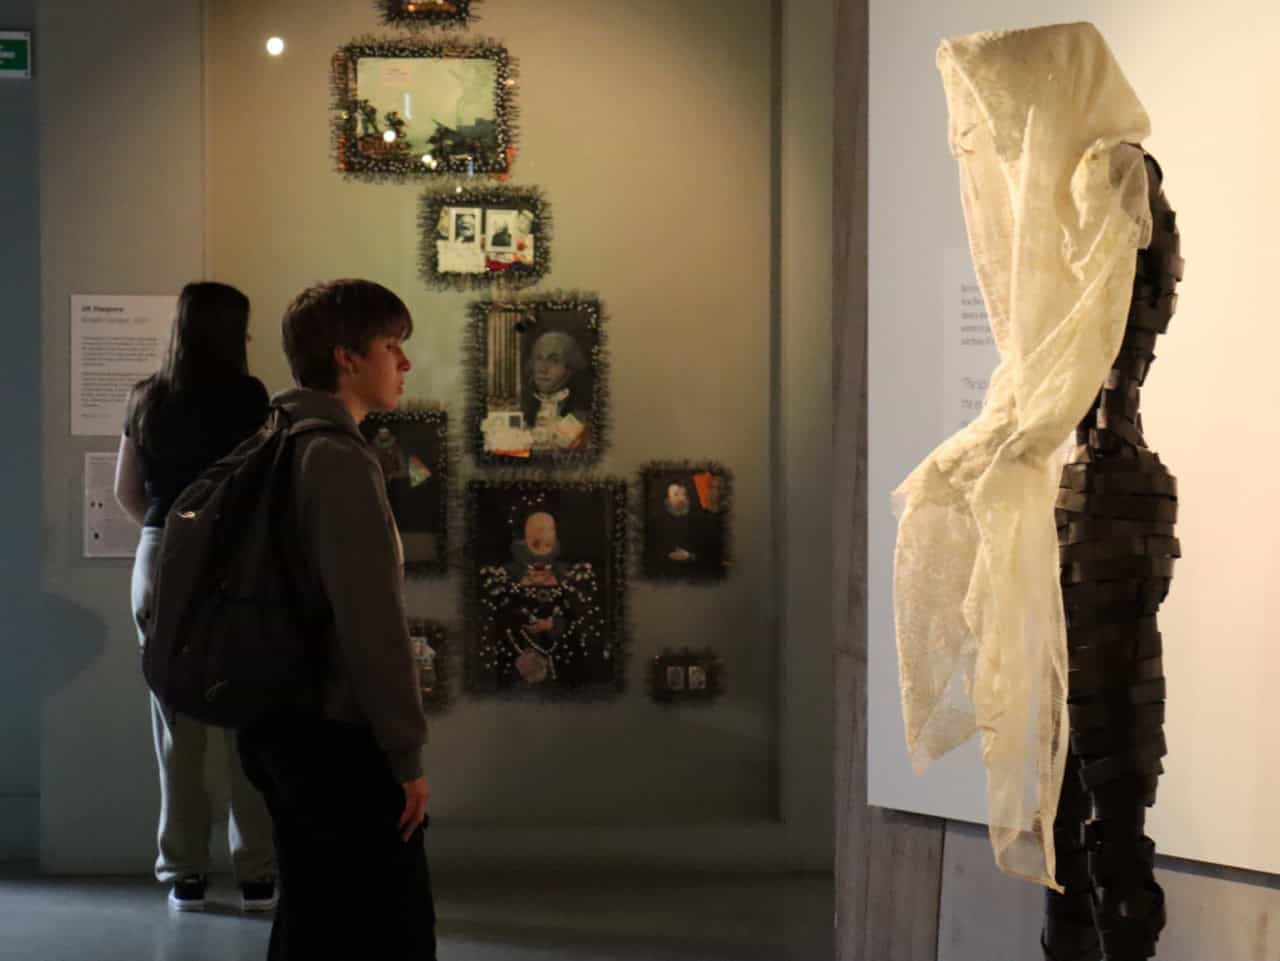 A Laurus Trust student views a sculpture at the International Slavery Museum in Liverpool.